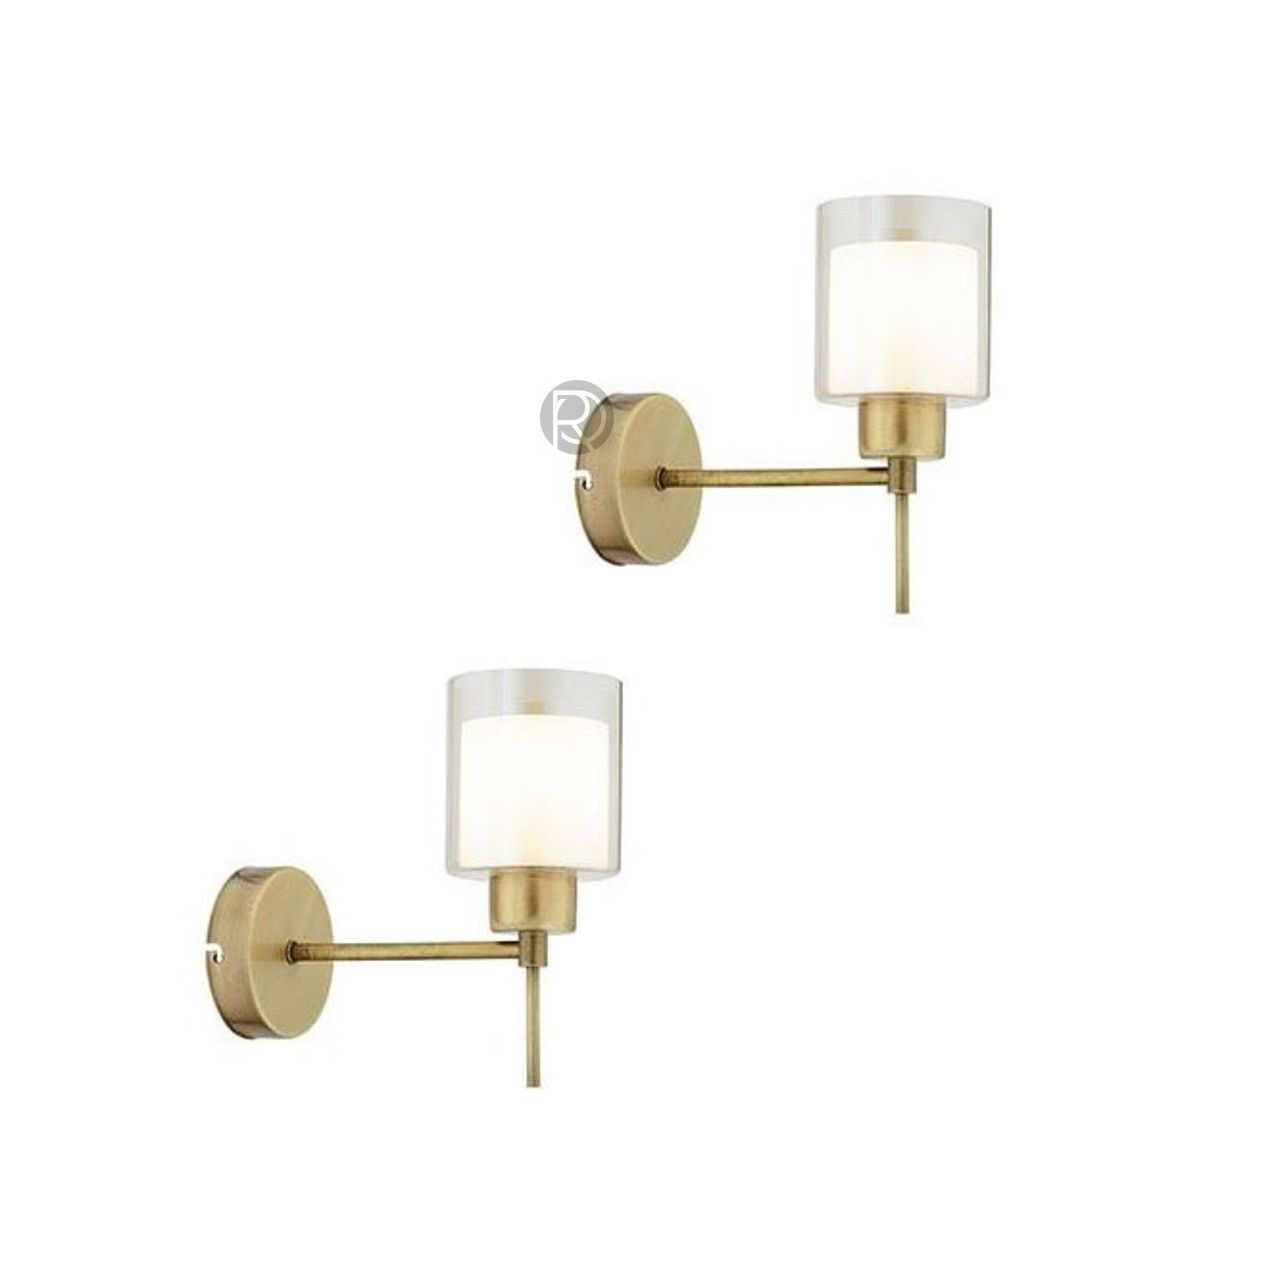 Wall lamp (Sconce) OLD GOLDIE by Romatti